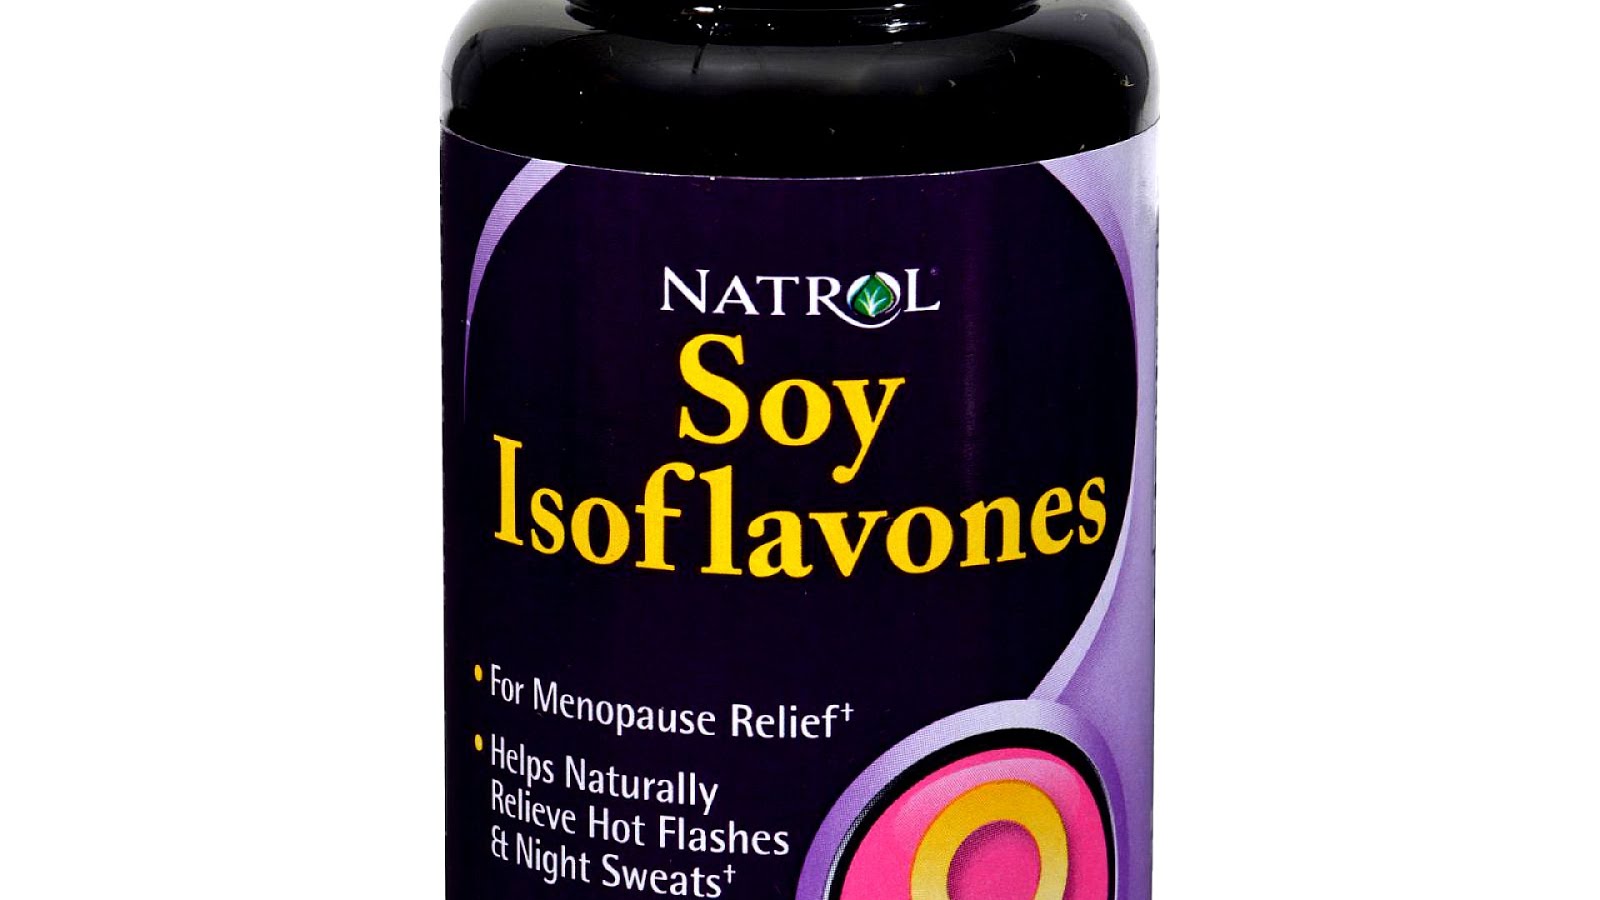 Soy for menopause